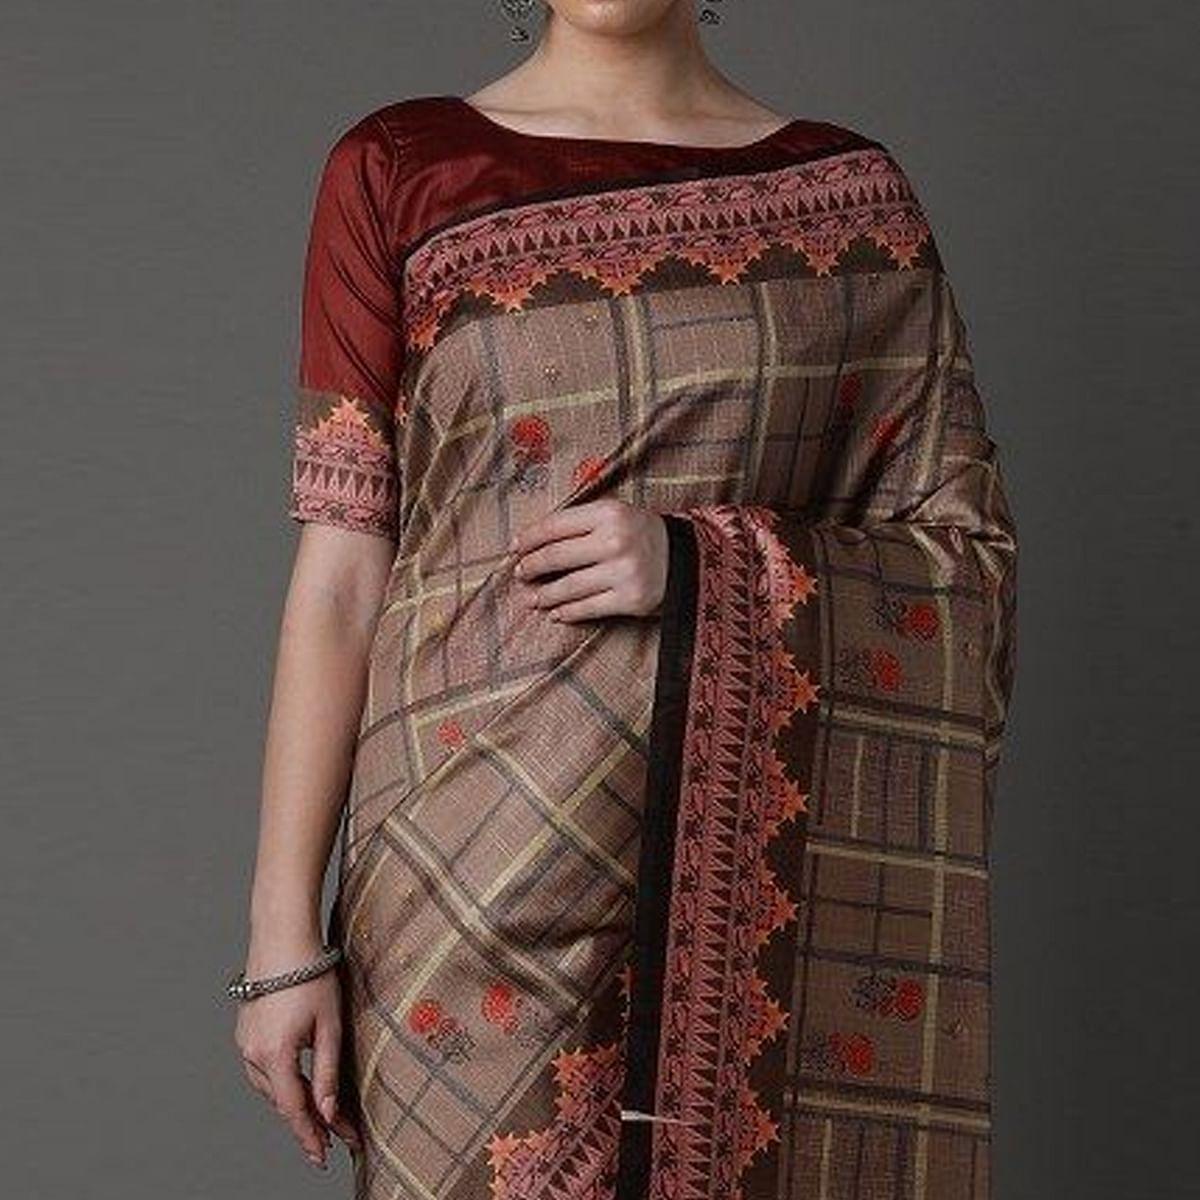 Brown Party Wear Satin Printed Saree With Unstitched Blouse - Peachmode